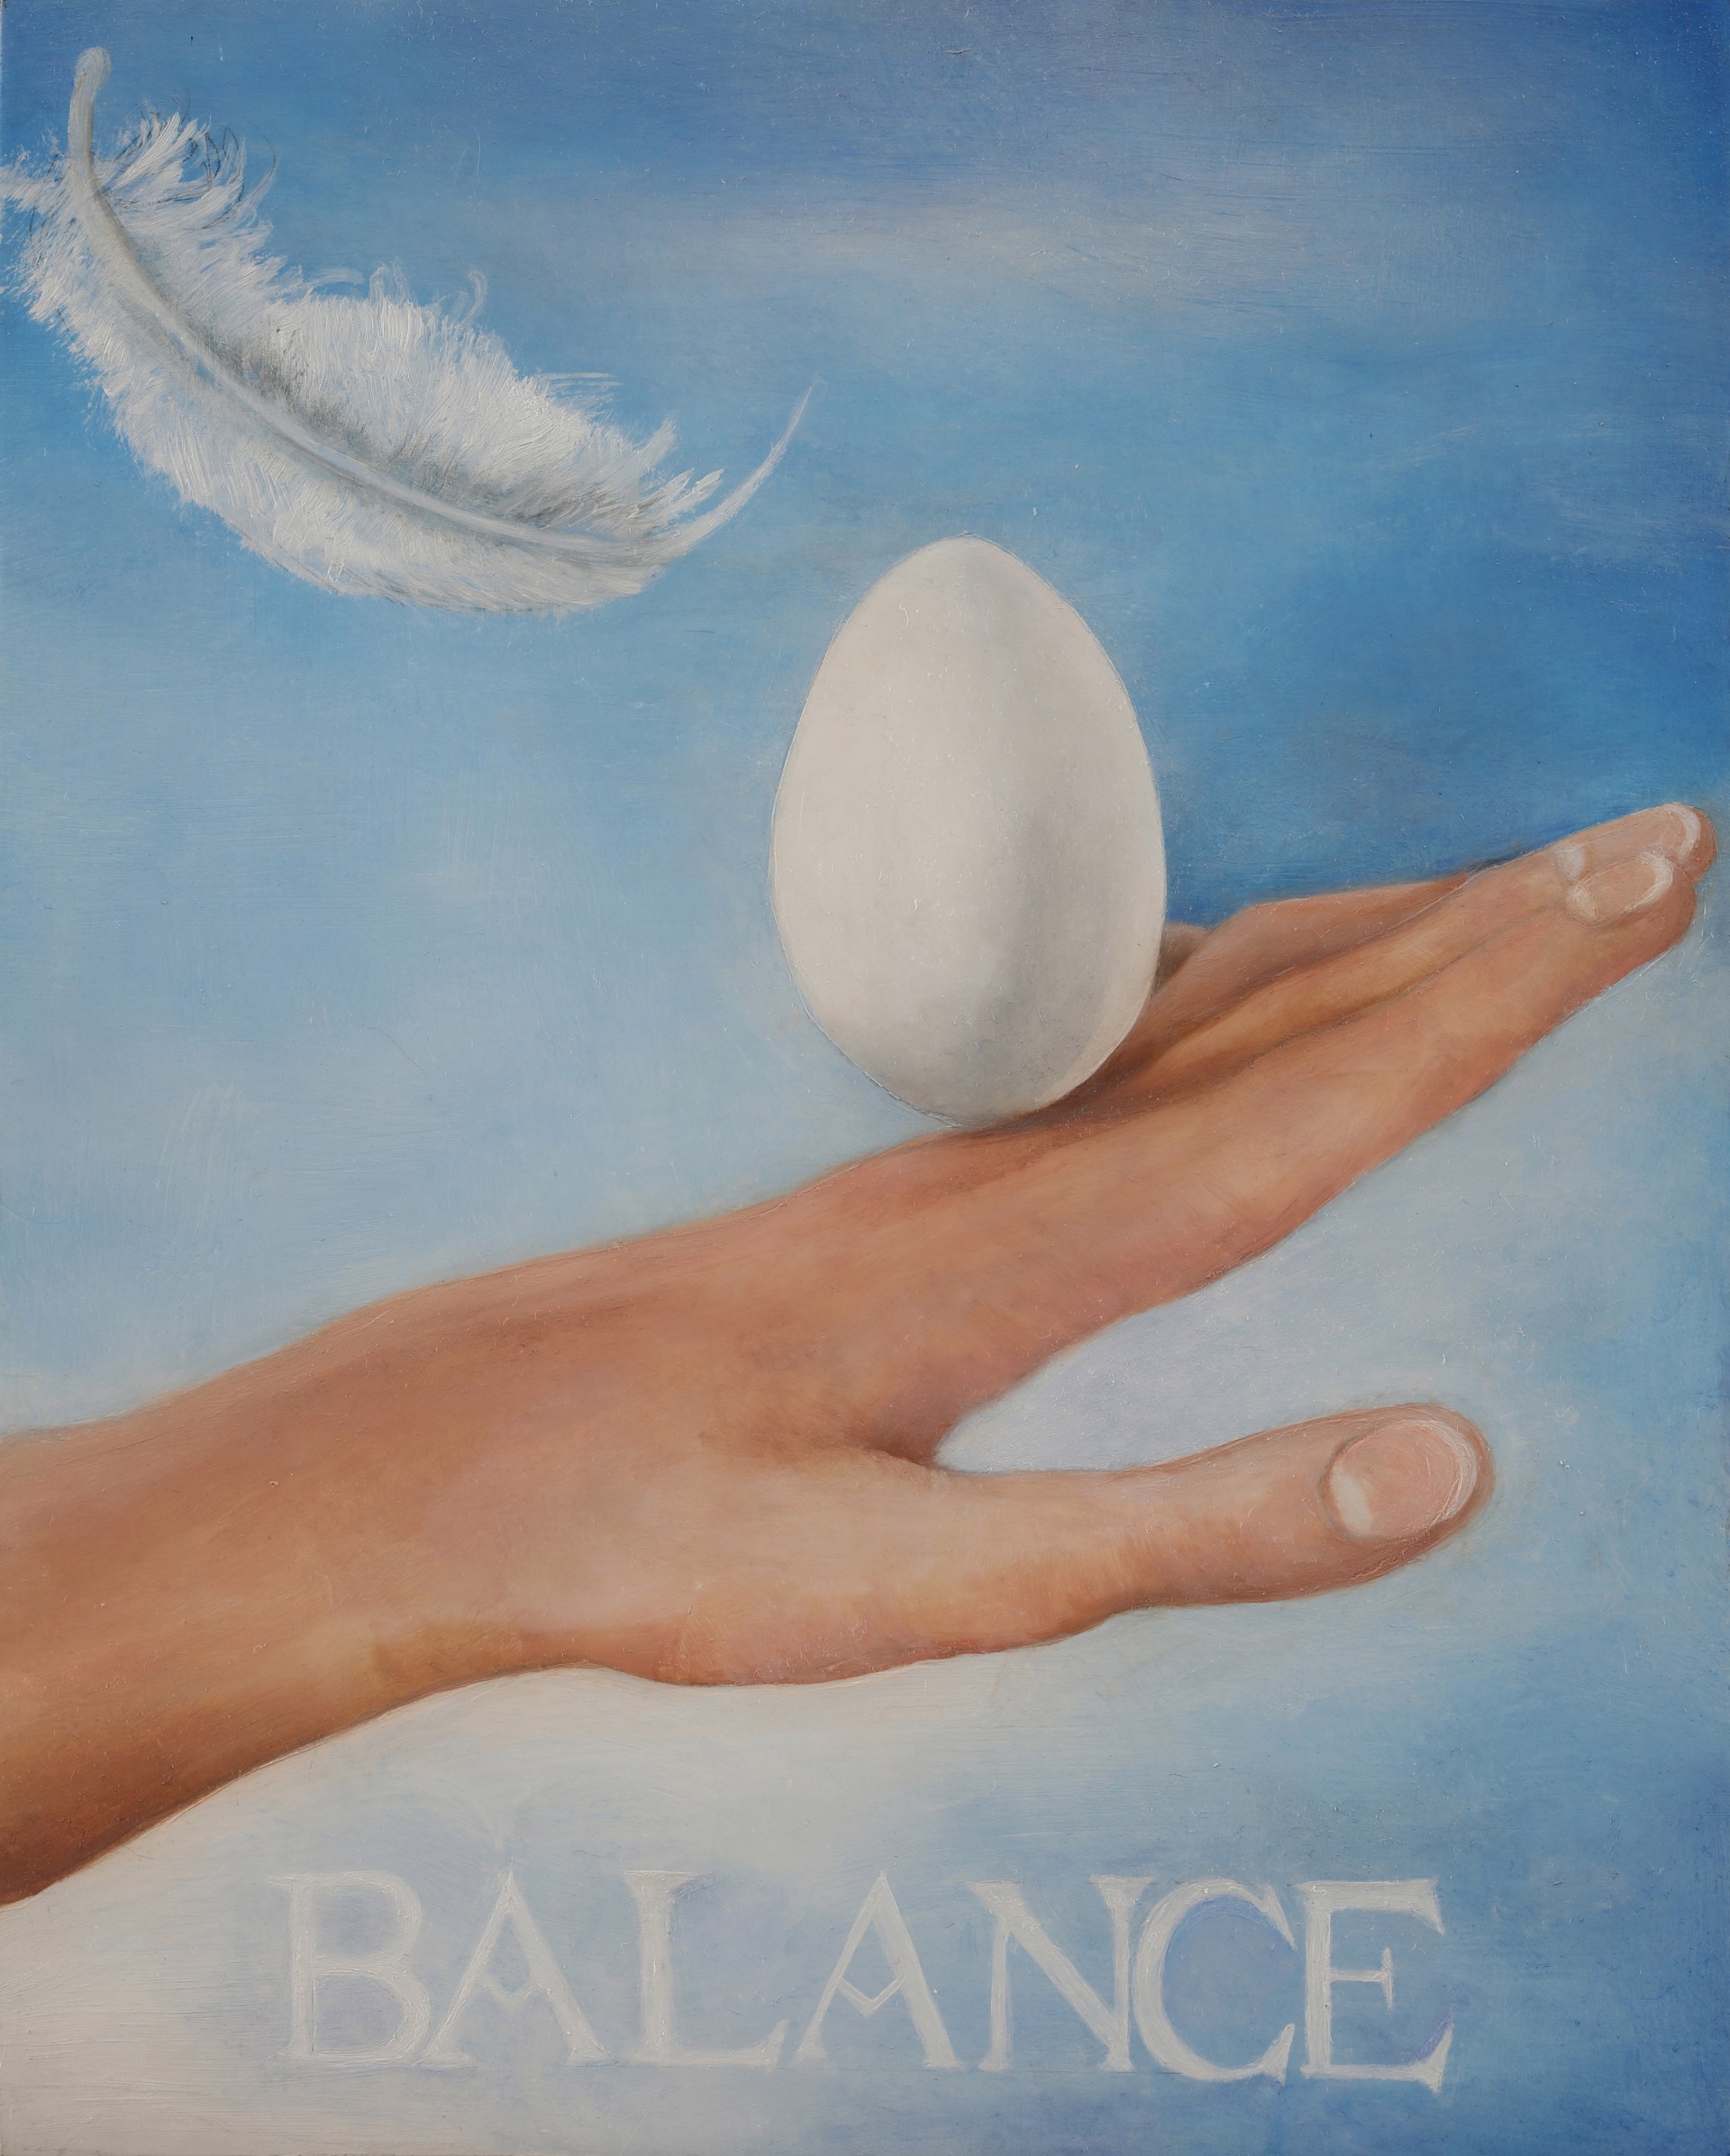 In the Balance by Adrienne Sherman